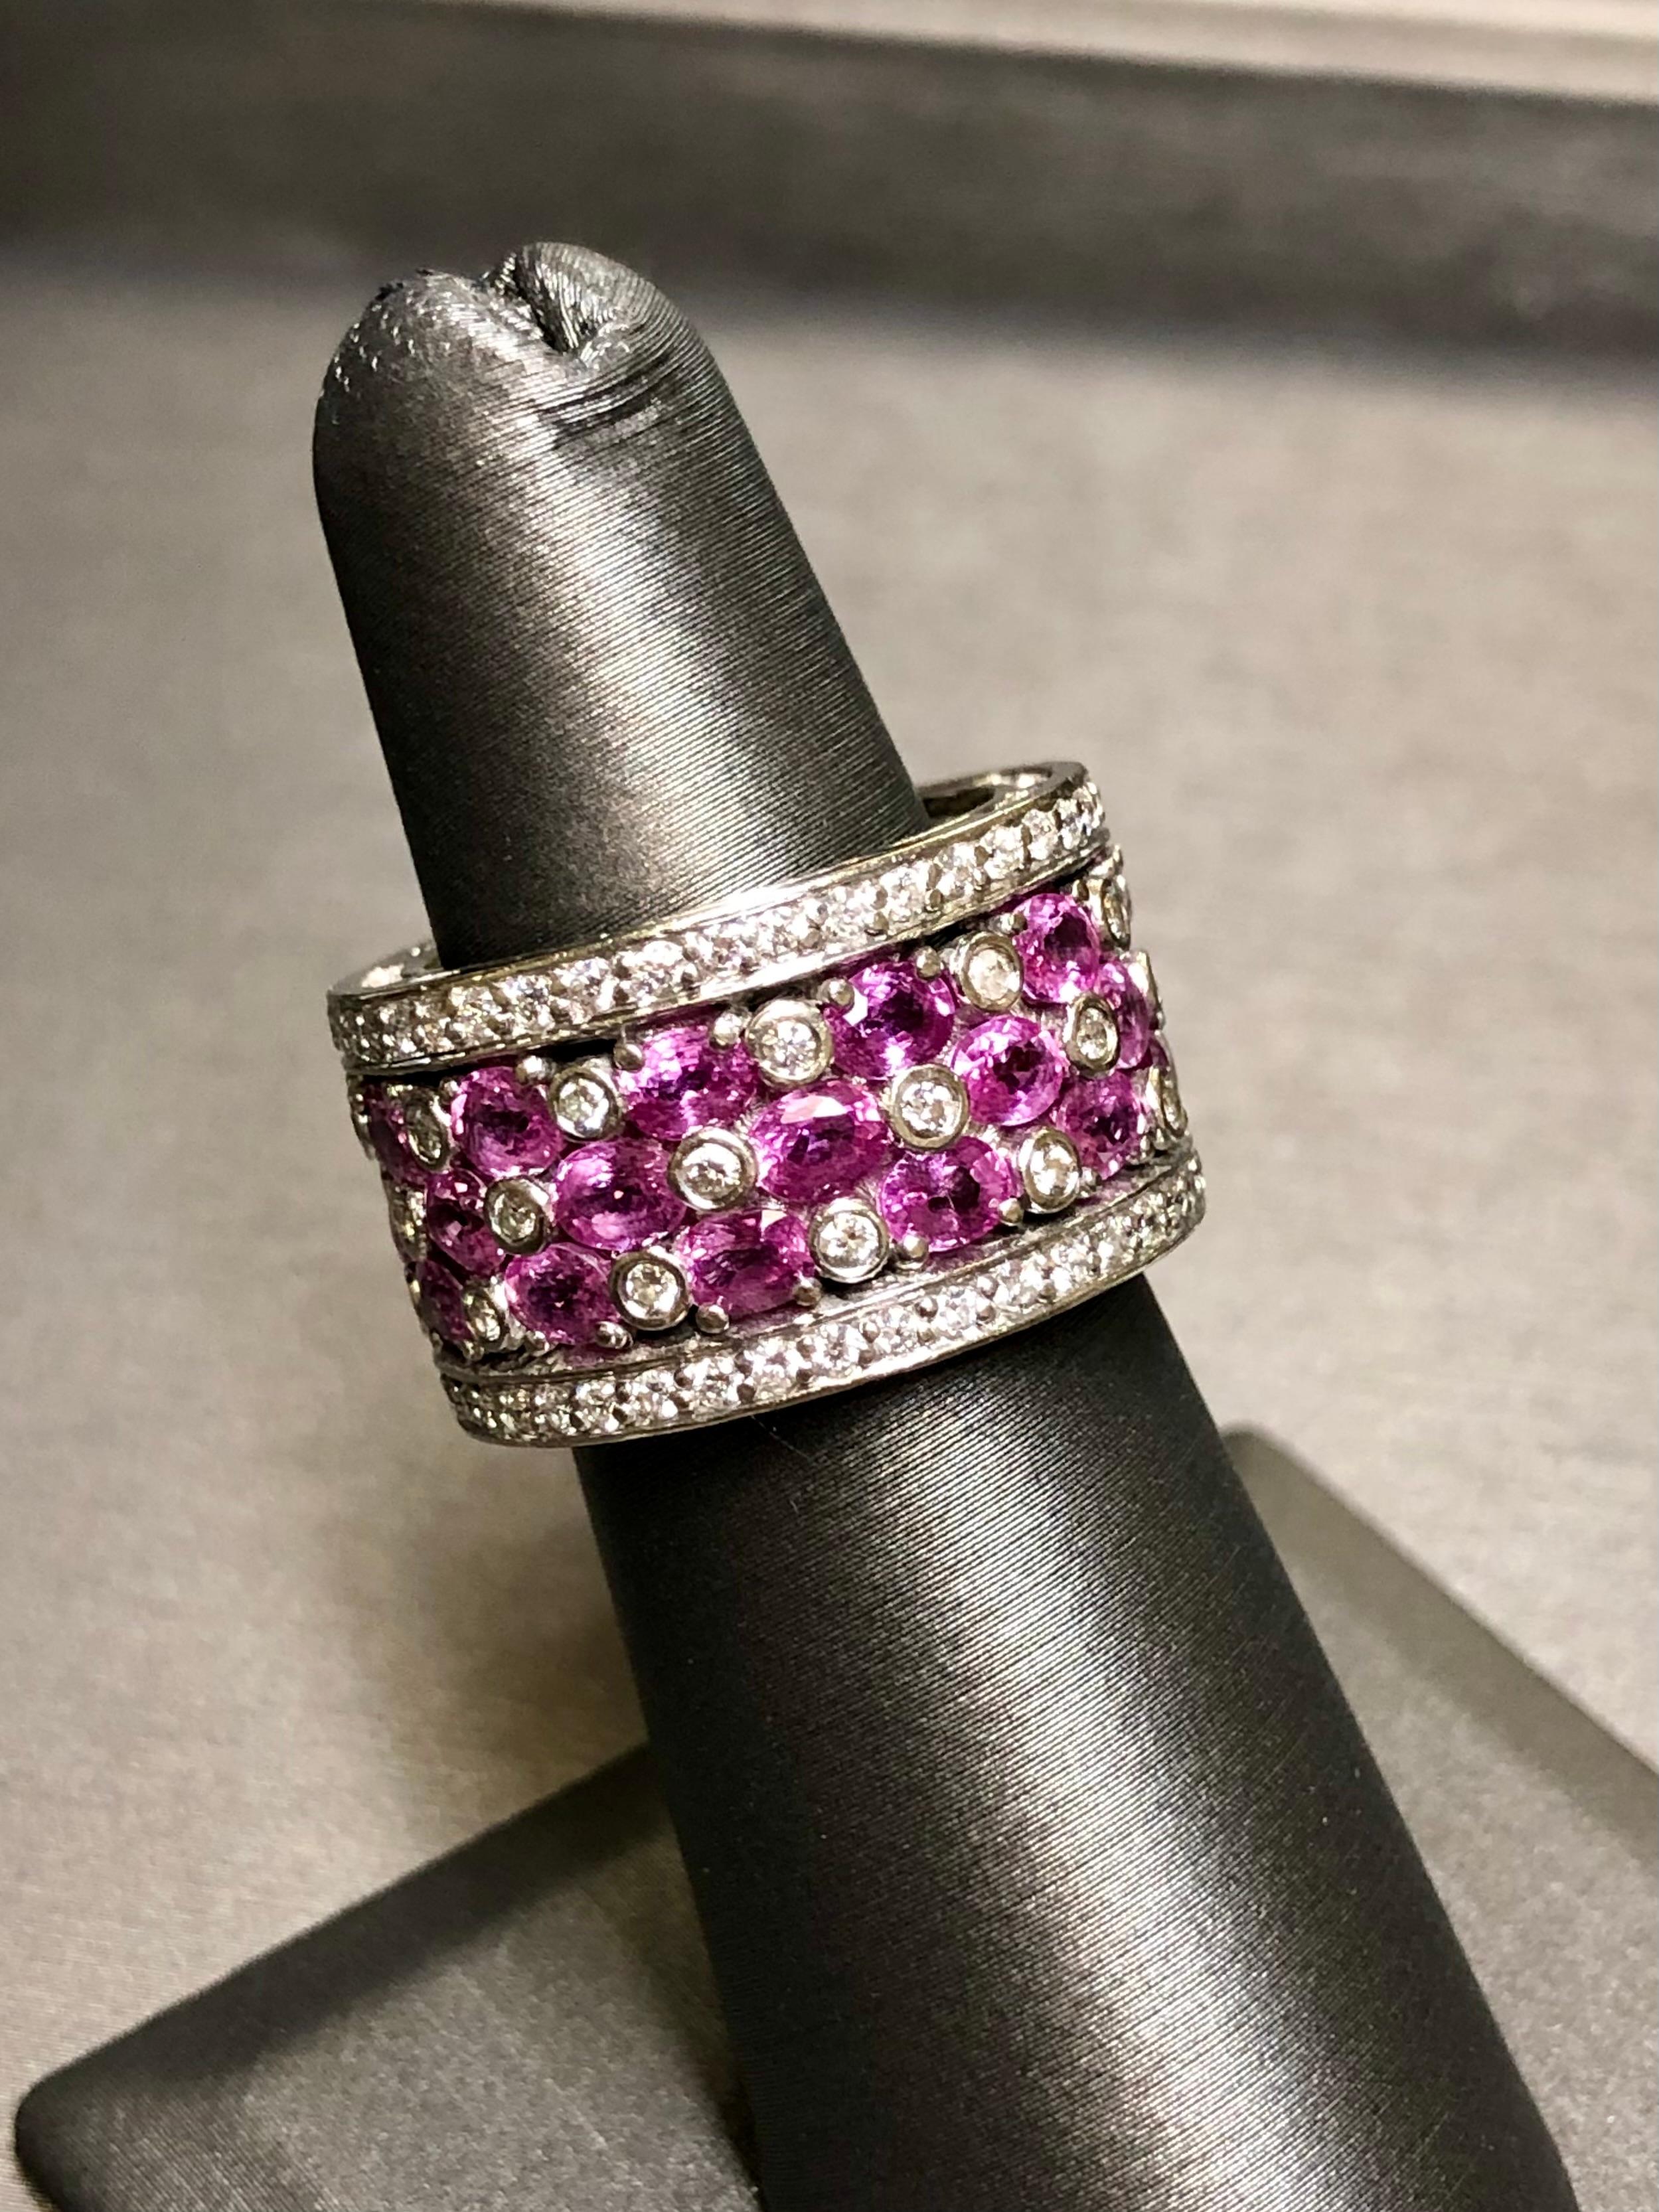 
A fabulously well made band ring done in 18K white gold set with approximately 9cttw in natural, oval cut vibrant pink sapphires (.25 each) as well as 1.86cttw in H-I Vs1-2 clarity round diamonds. Not your average band.


Dimensions/Weight:

Ring